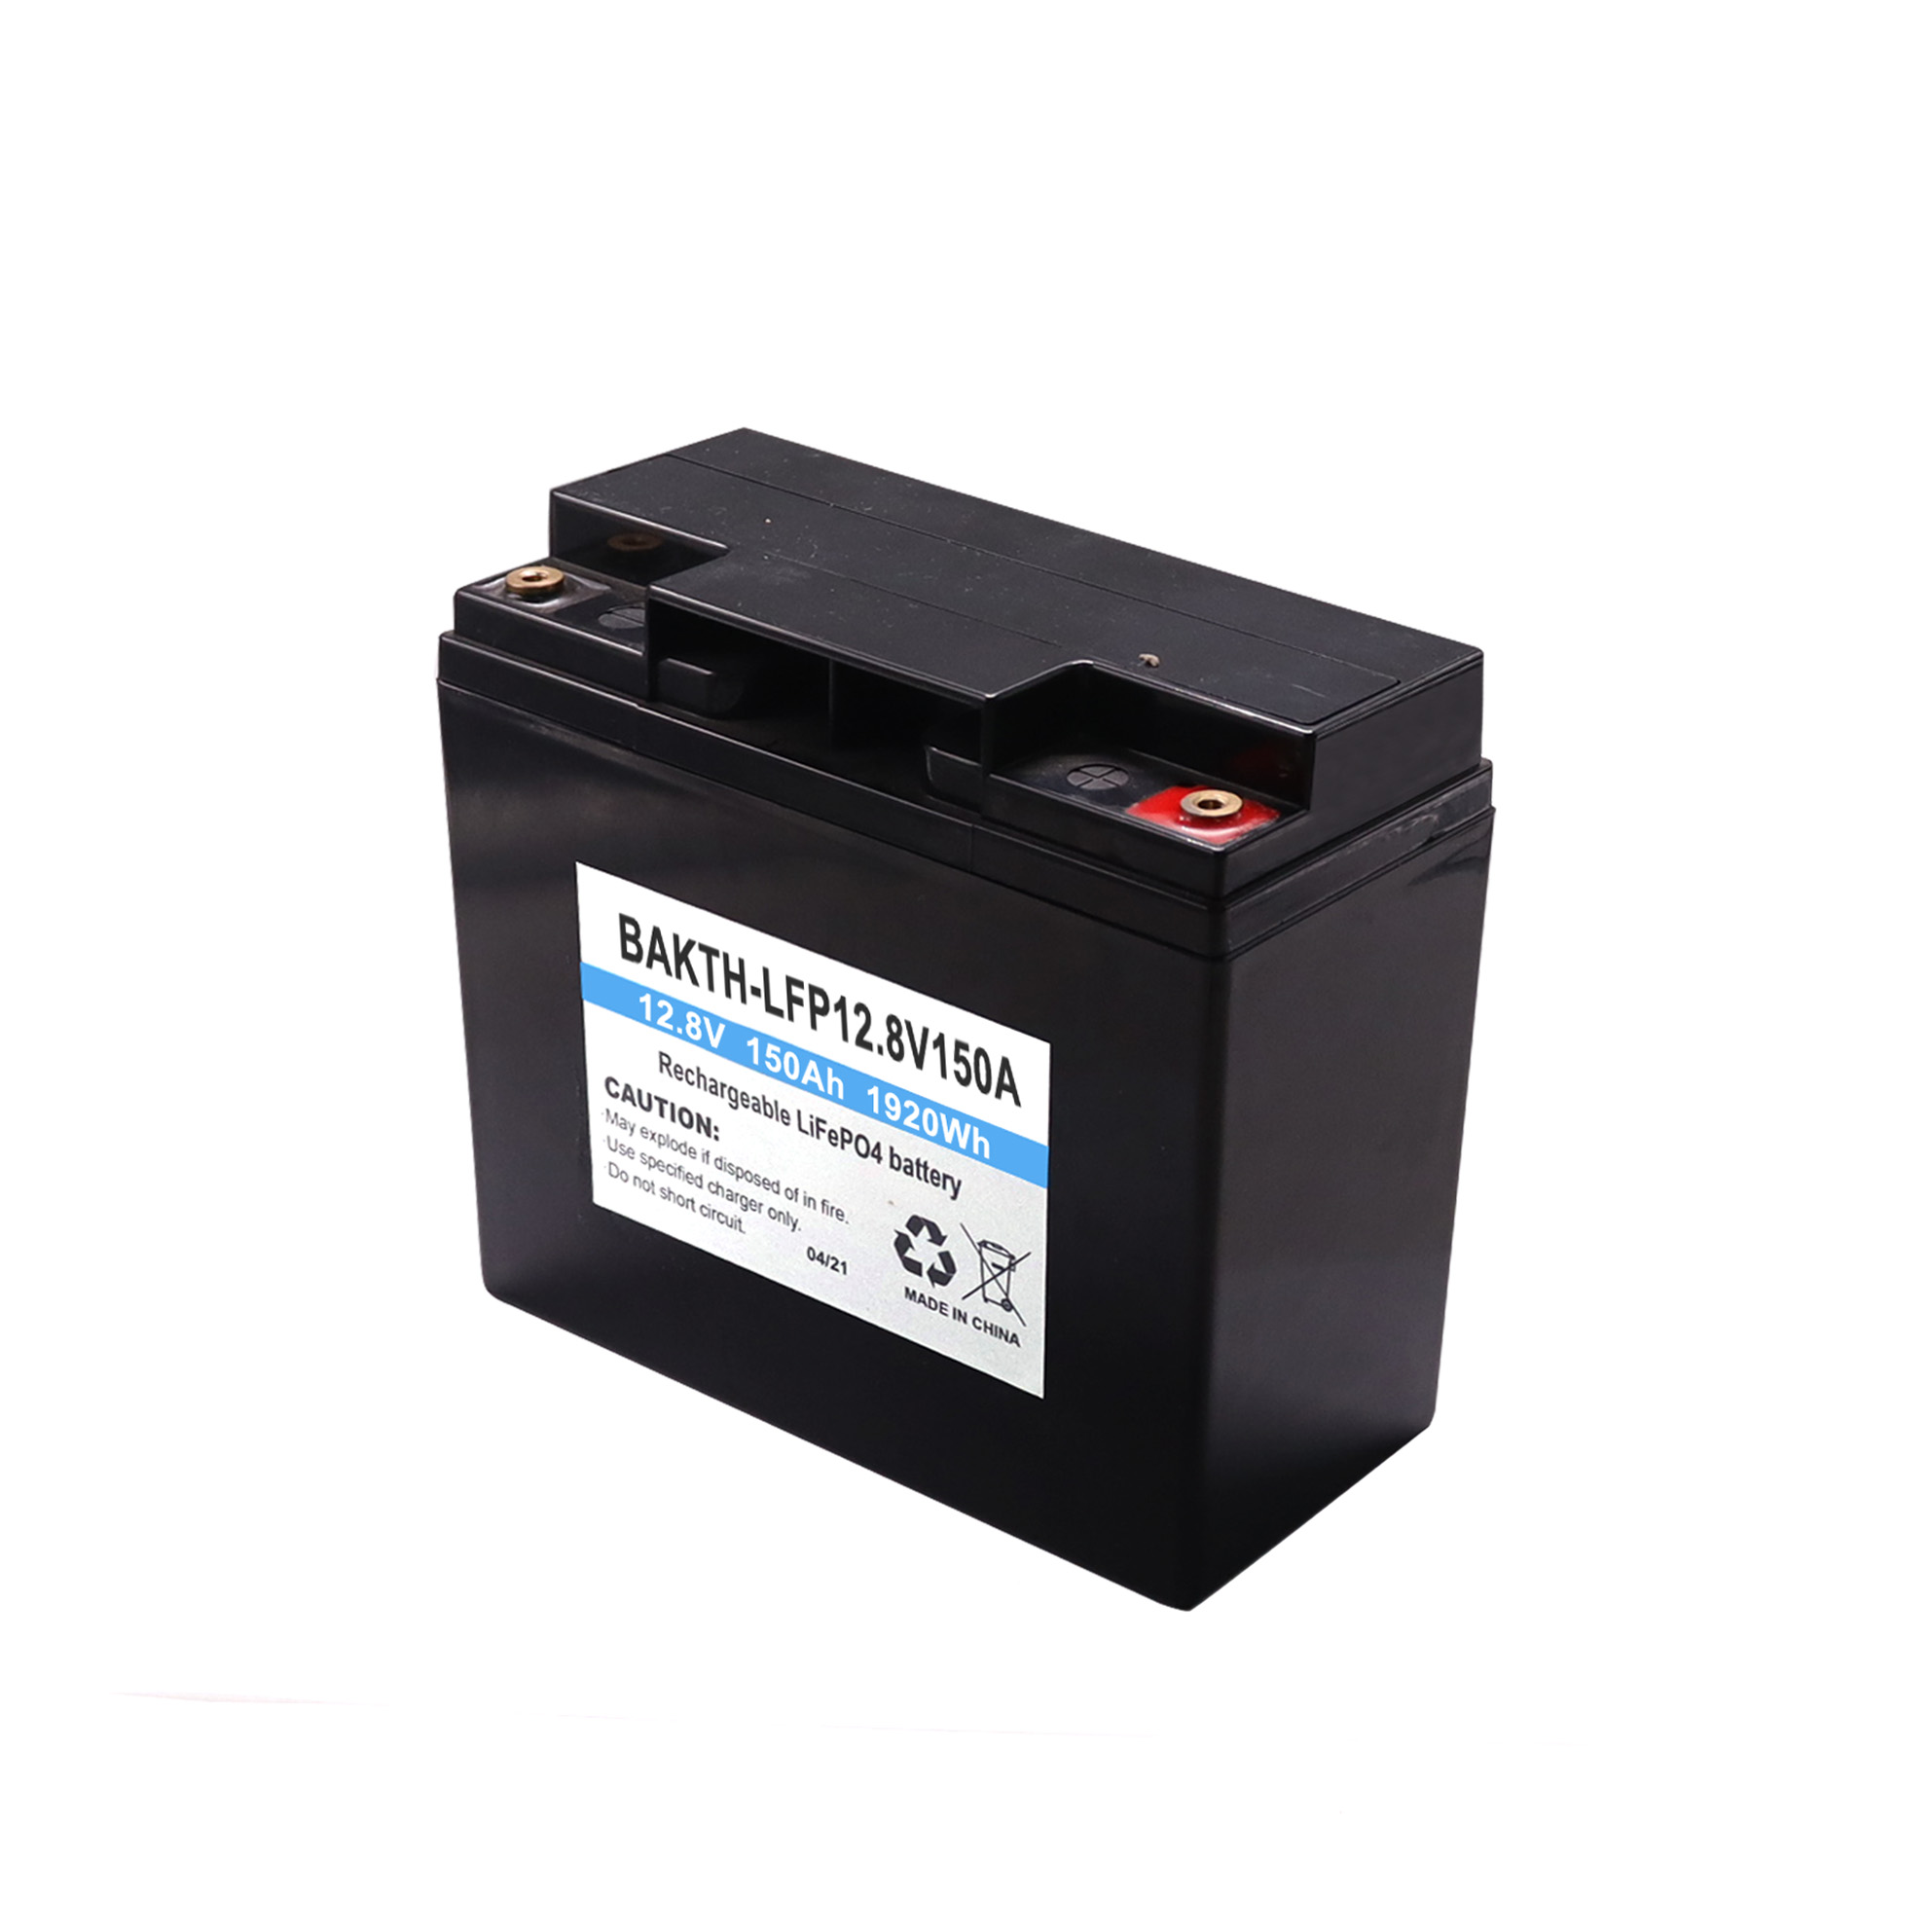 charge 12 volt storage battery for home use